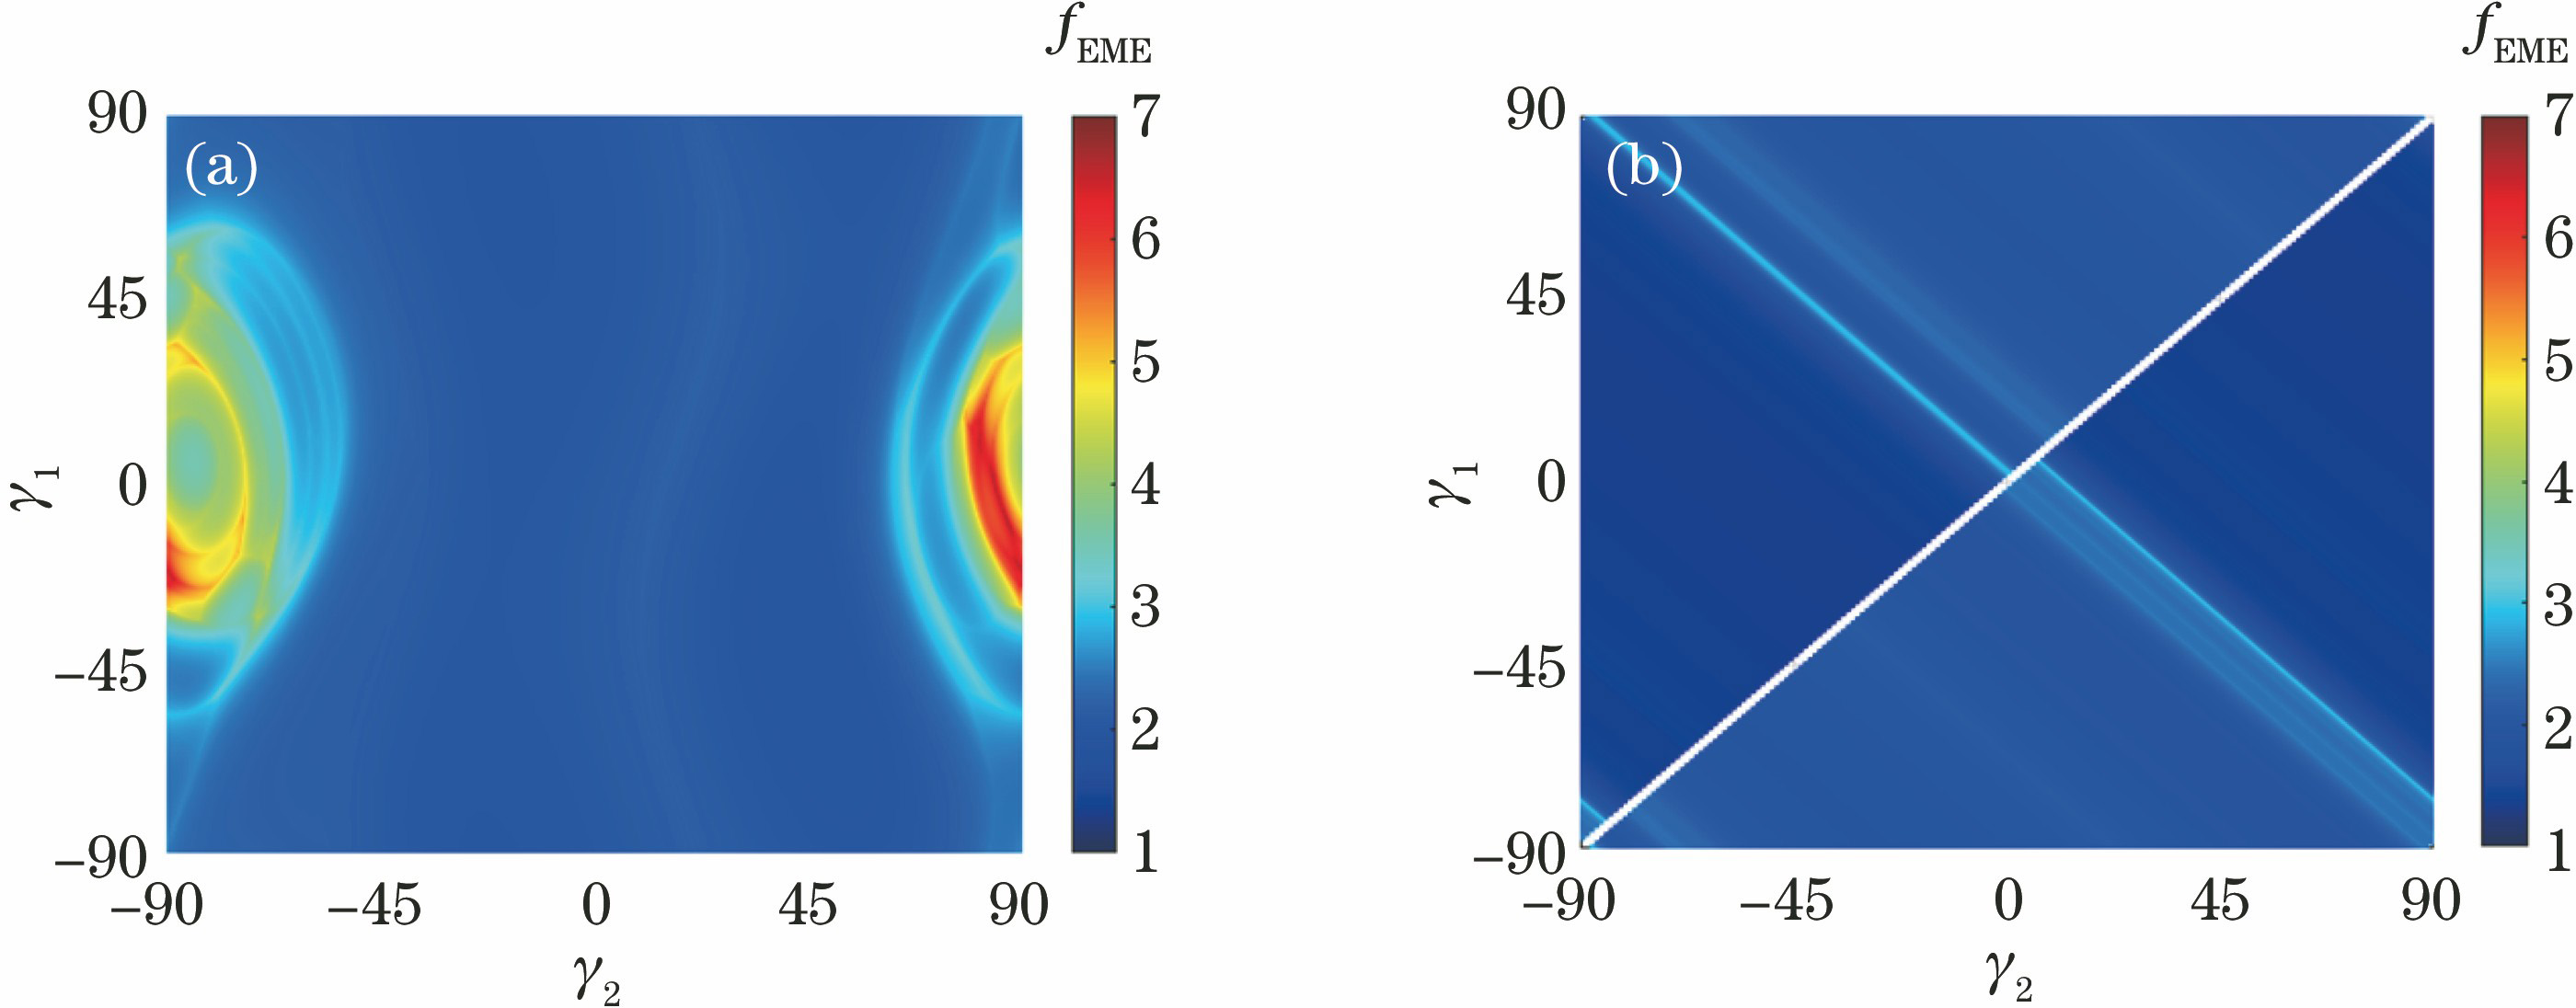 EME values vary with the angle of polarization at different values of k. (a) k=0.284; (b) k=1